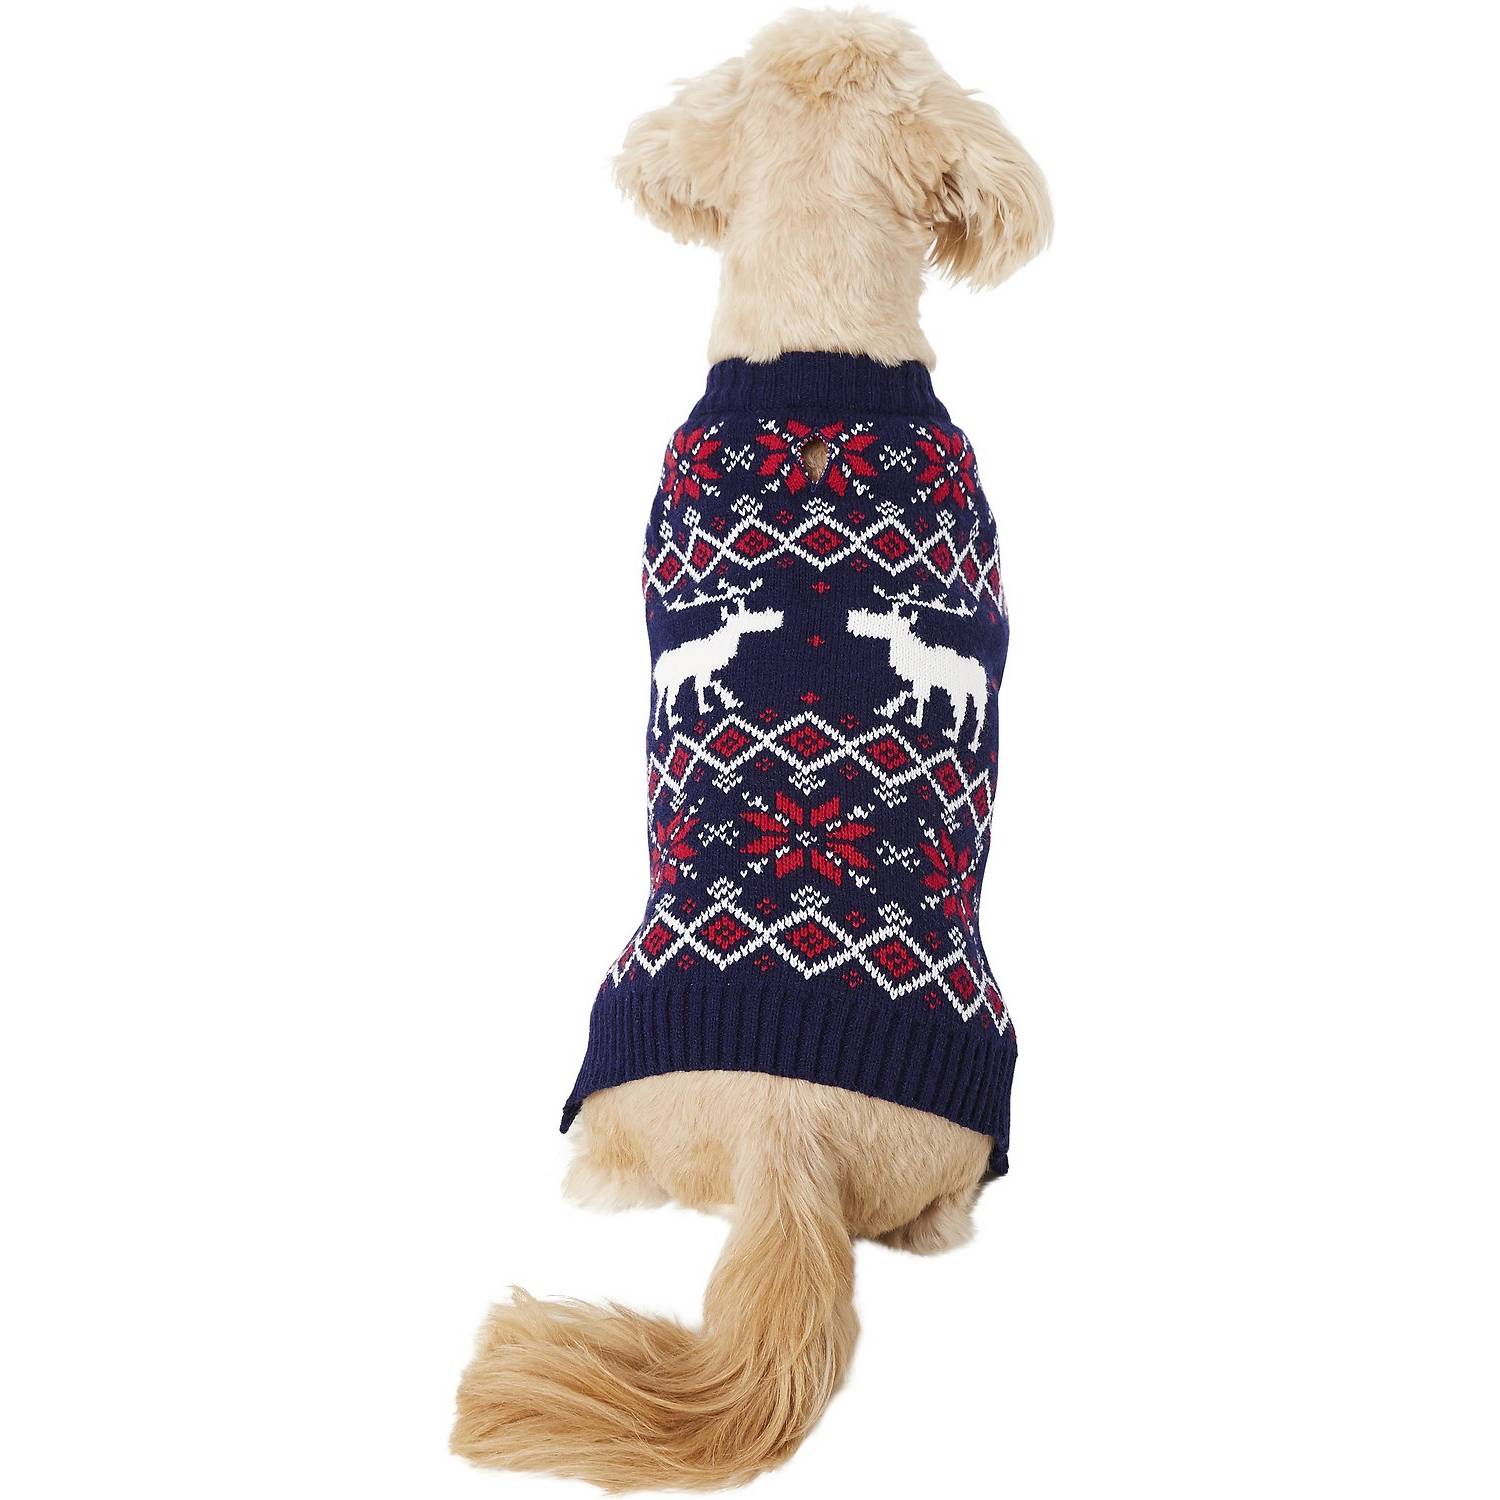 CHBORCHICEN Pet Dog Sweaters Classic Knitwear Turtleneck Winter Warm Puppy Clothing Cute Strawberry and Heart Doggie Sweater XX-Small, Sky Blue